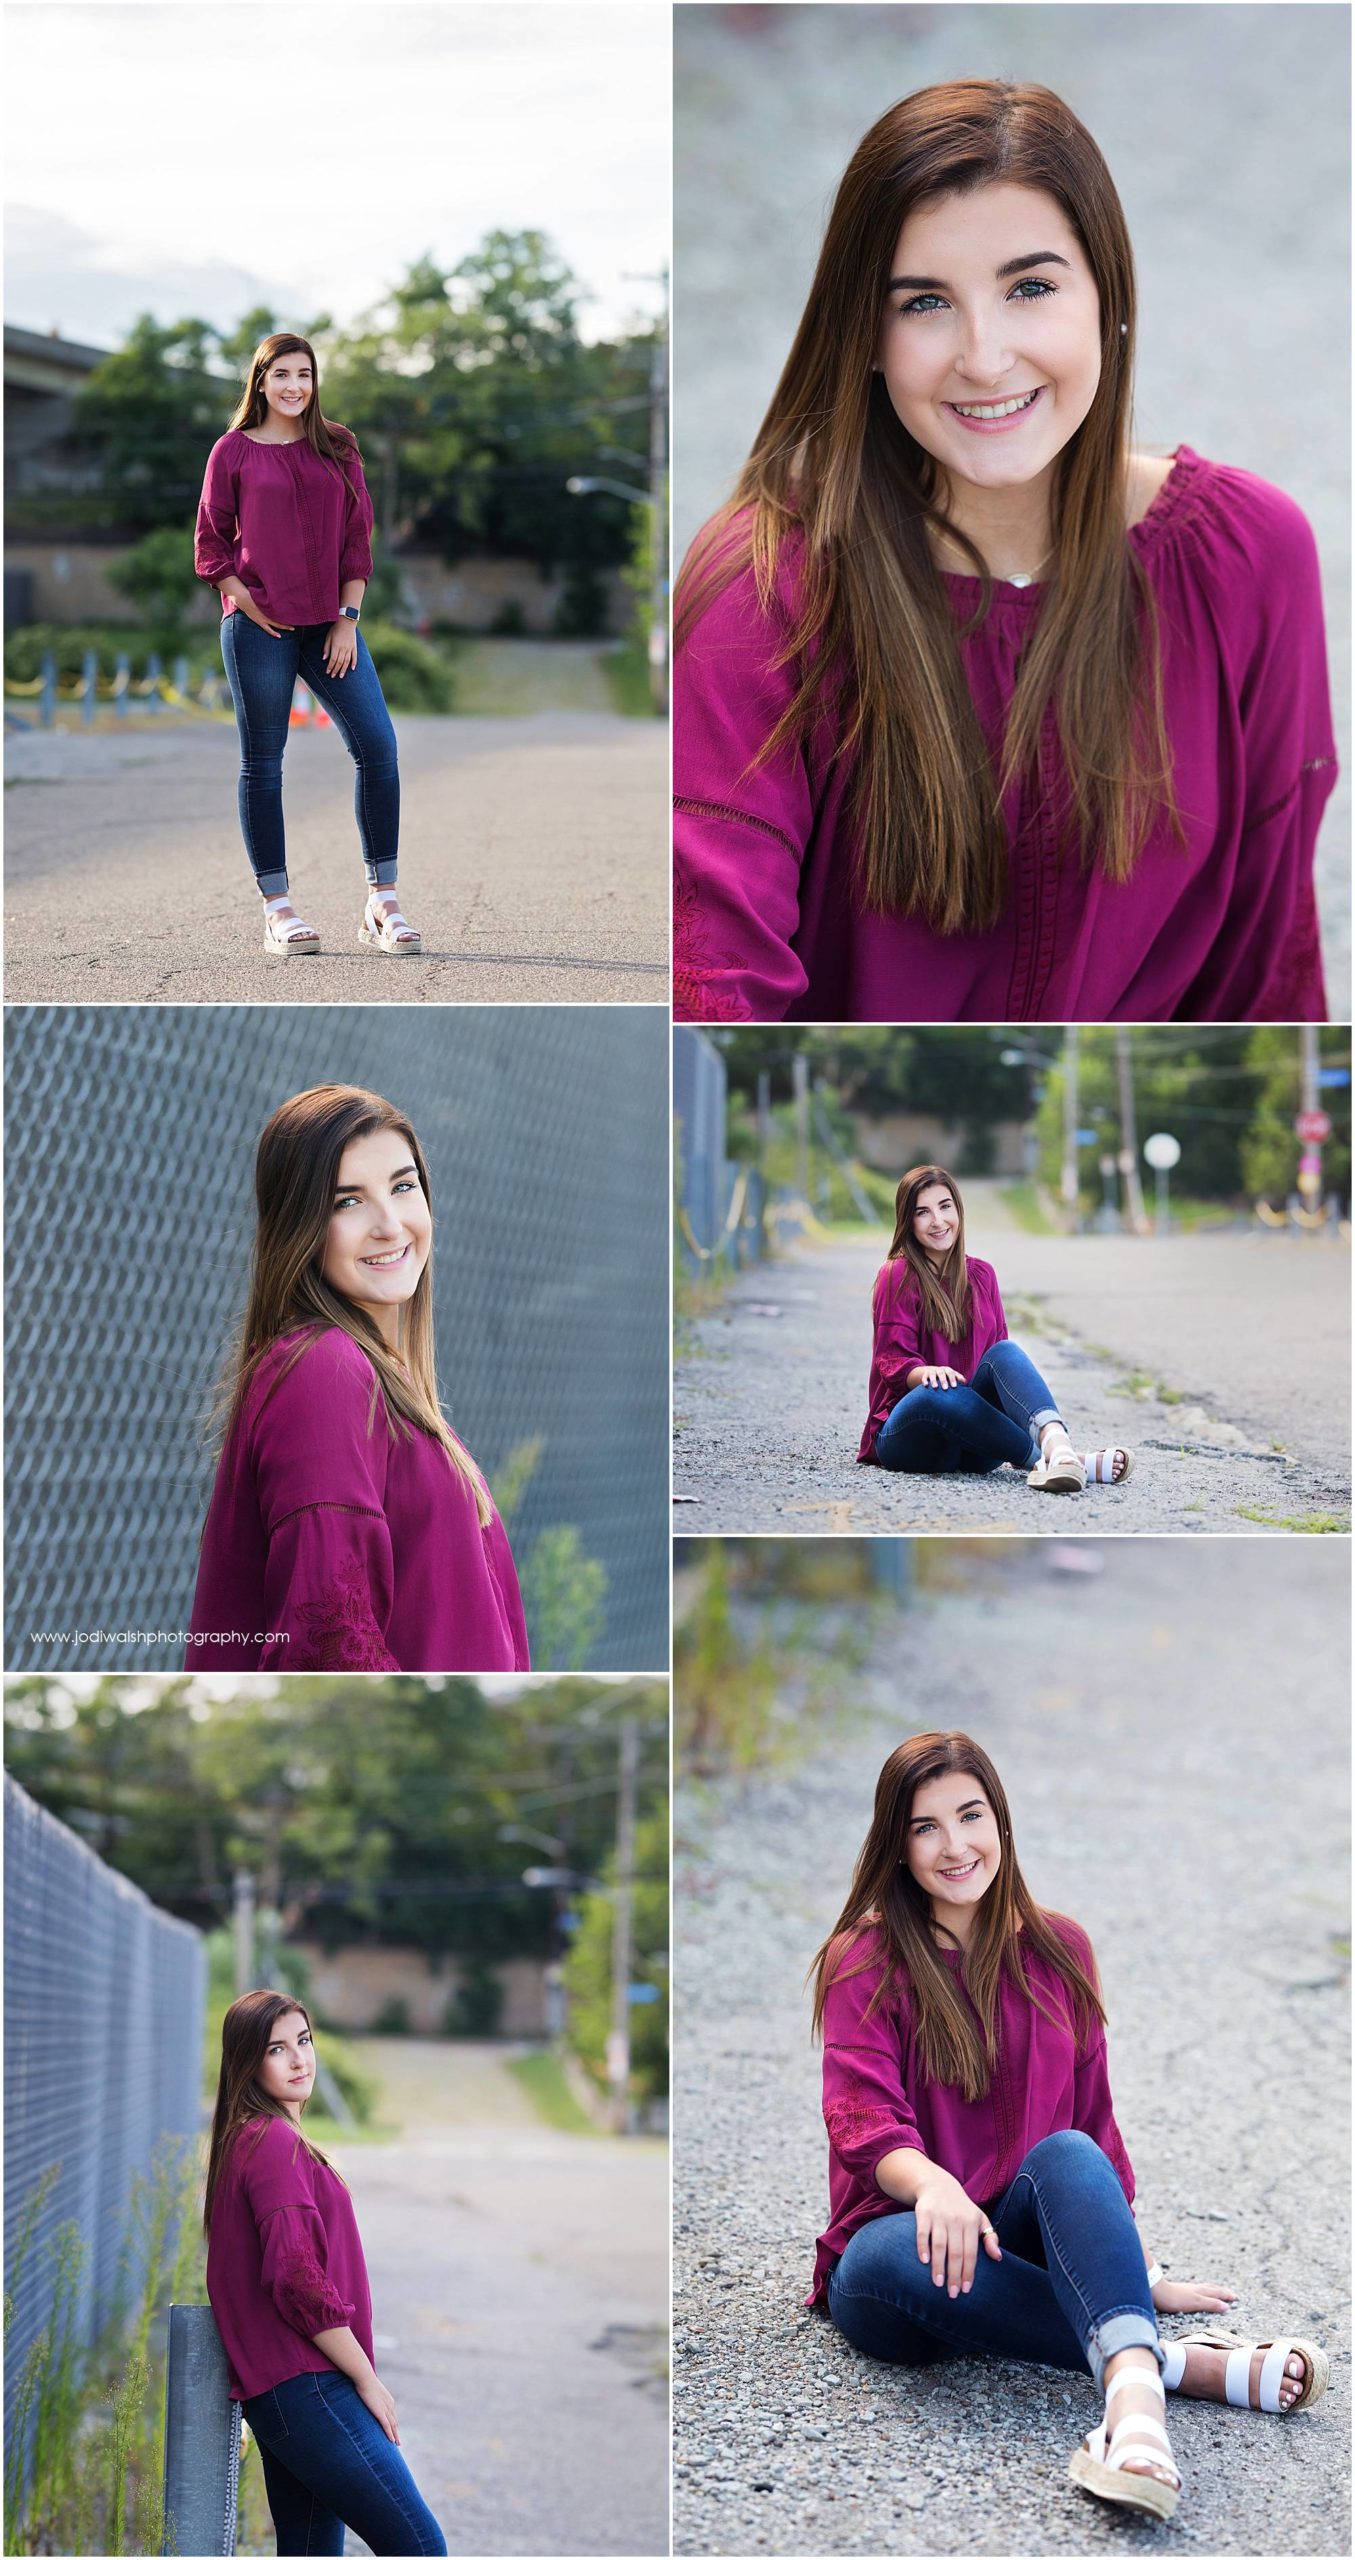 collage of senior portrait image by Jodi Walsh Photography. Images show a senior girl in a magenta top and blue jeans in an alleyway on the North Side of Pittsburgh.